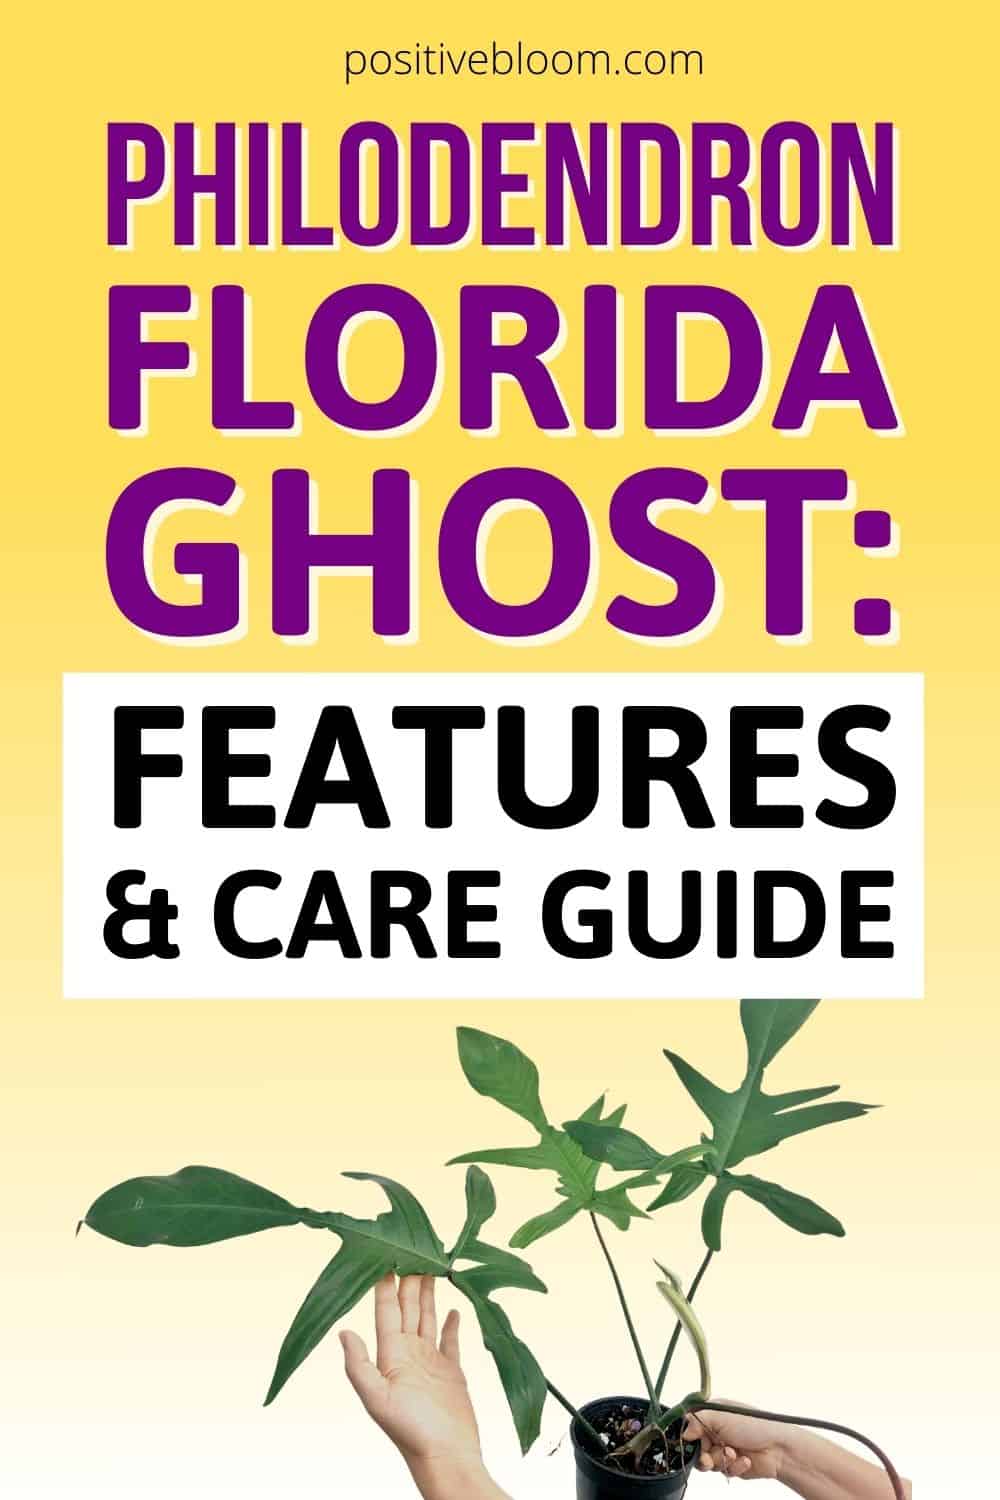 Philodendron Florida Ghost Features And Care Guide